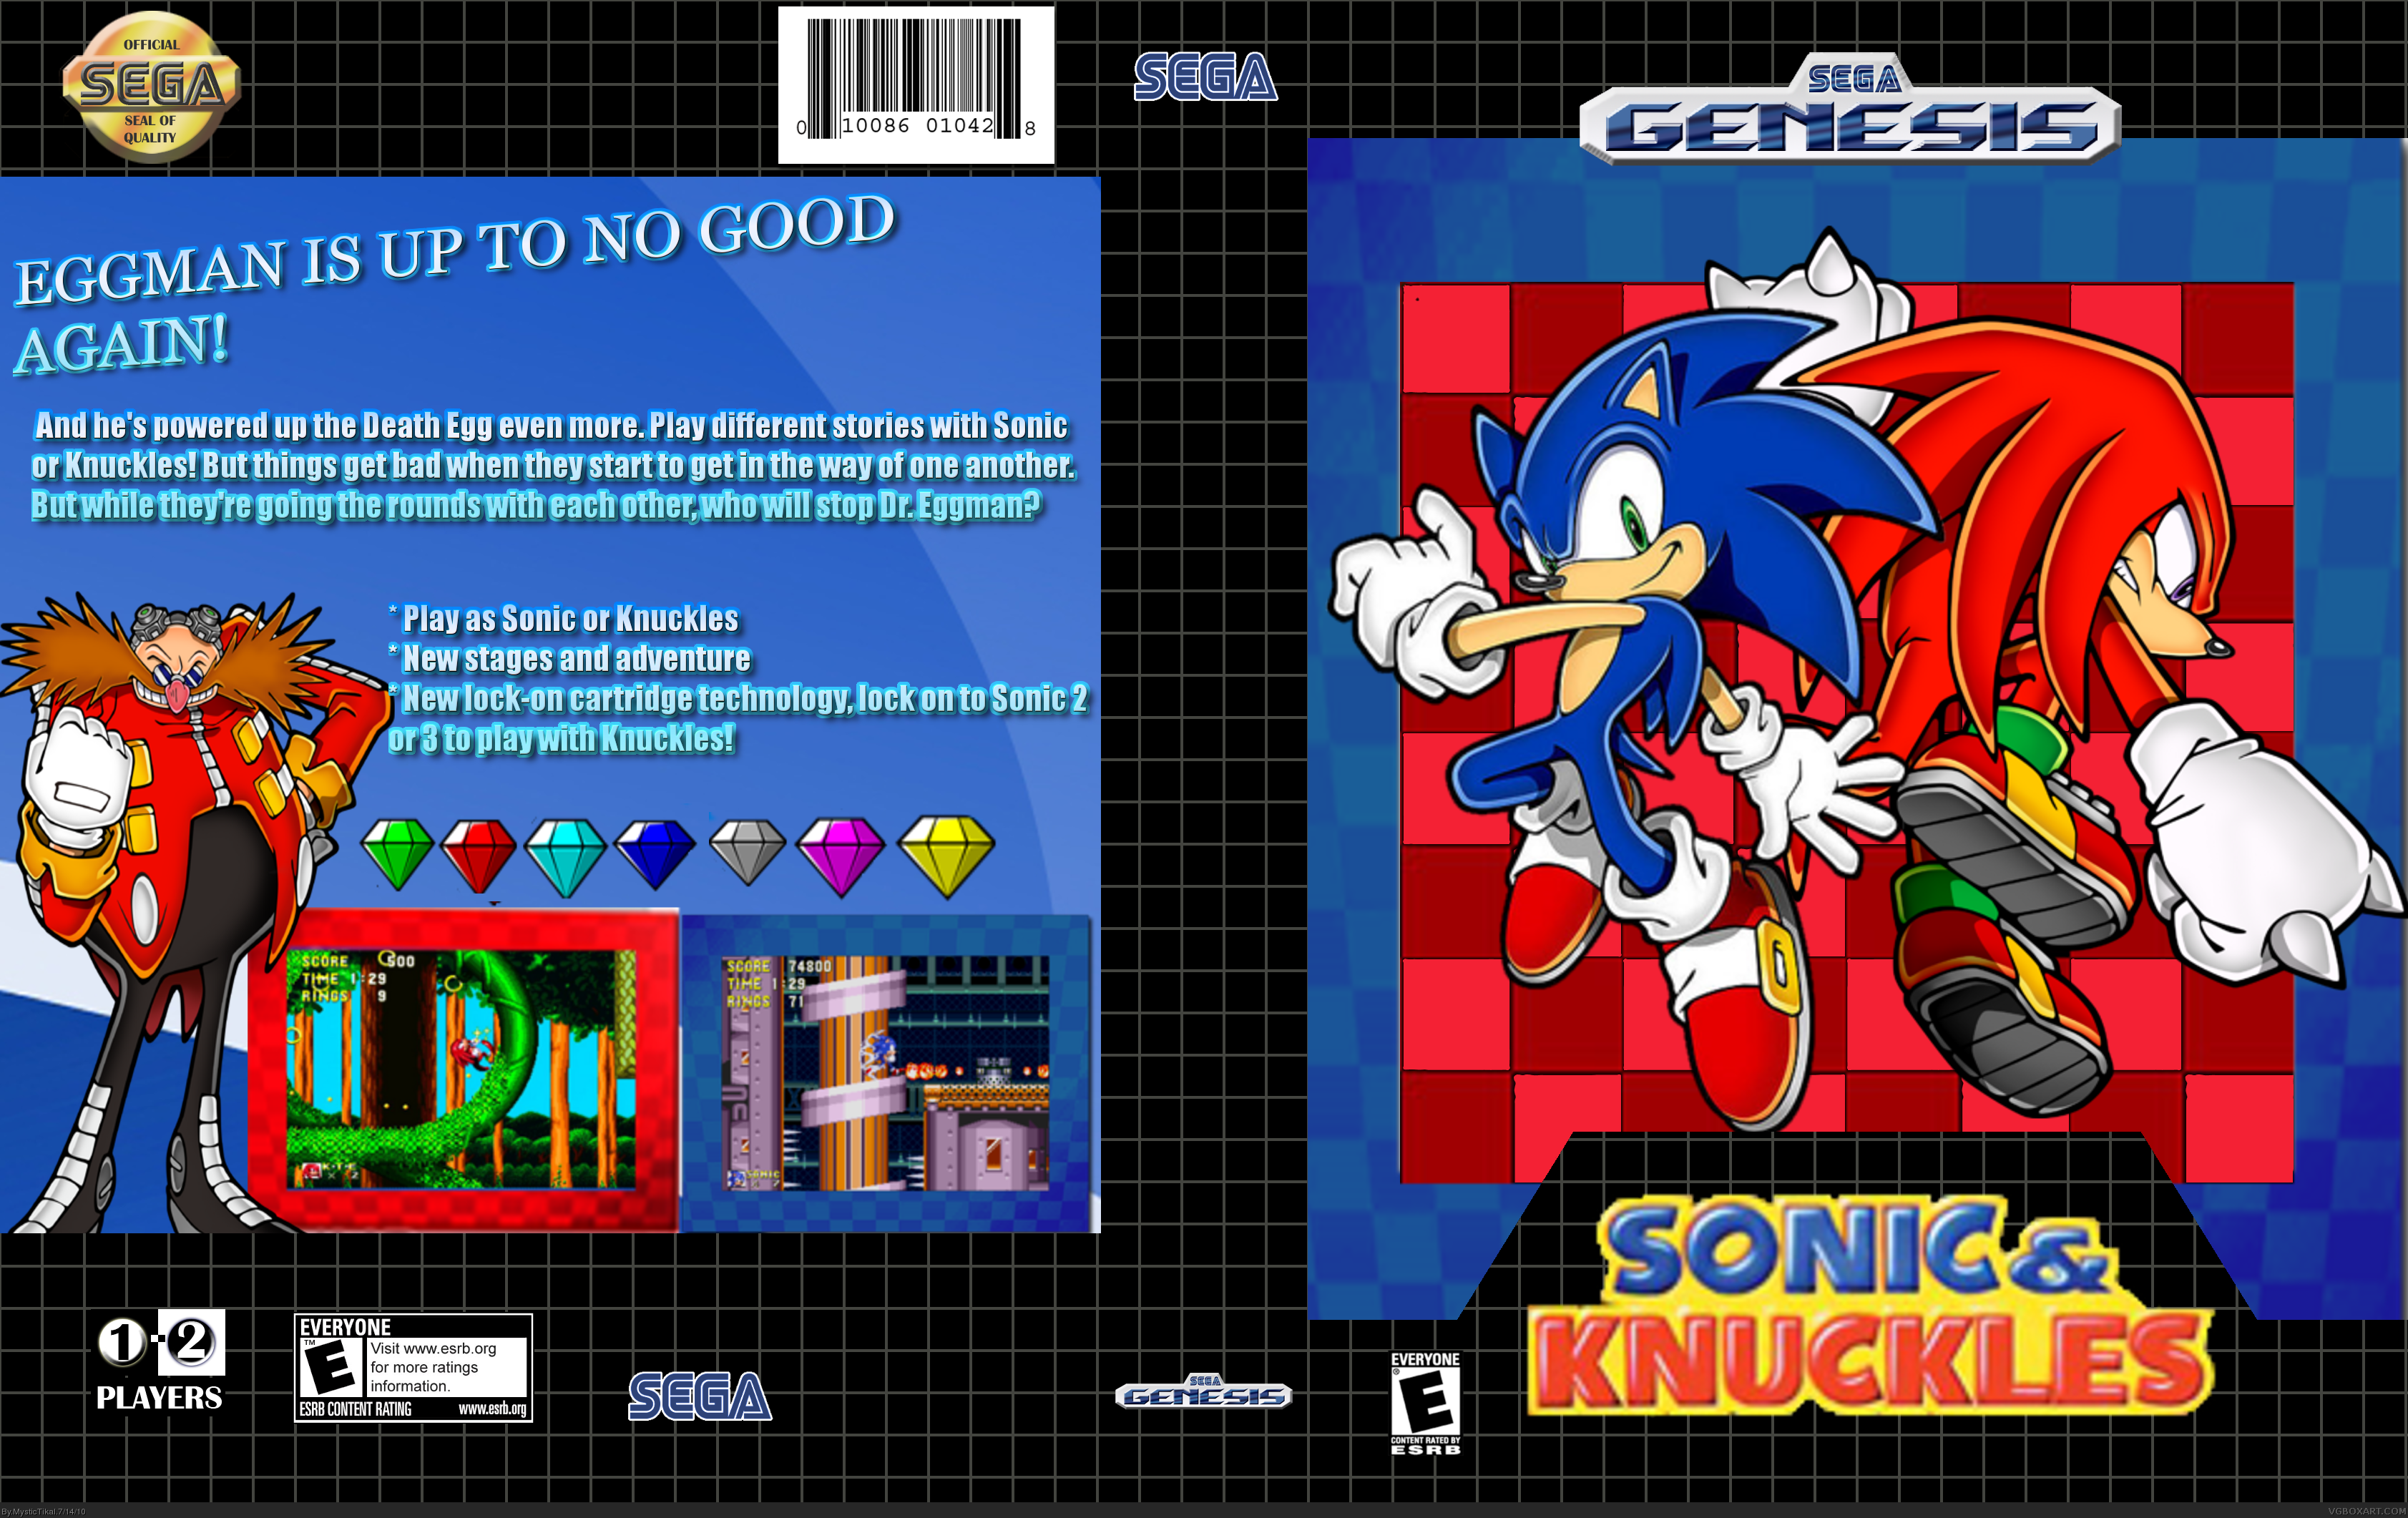 Sonic and knuckles download. Sonic Knuckles Sega картридж. Sonic and Knuckles & Sonic 1 сега картридж. Sonic 3 and Knuckles картридж. Sonic and Knuckles & Sonic 3 сега картридж.